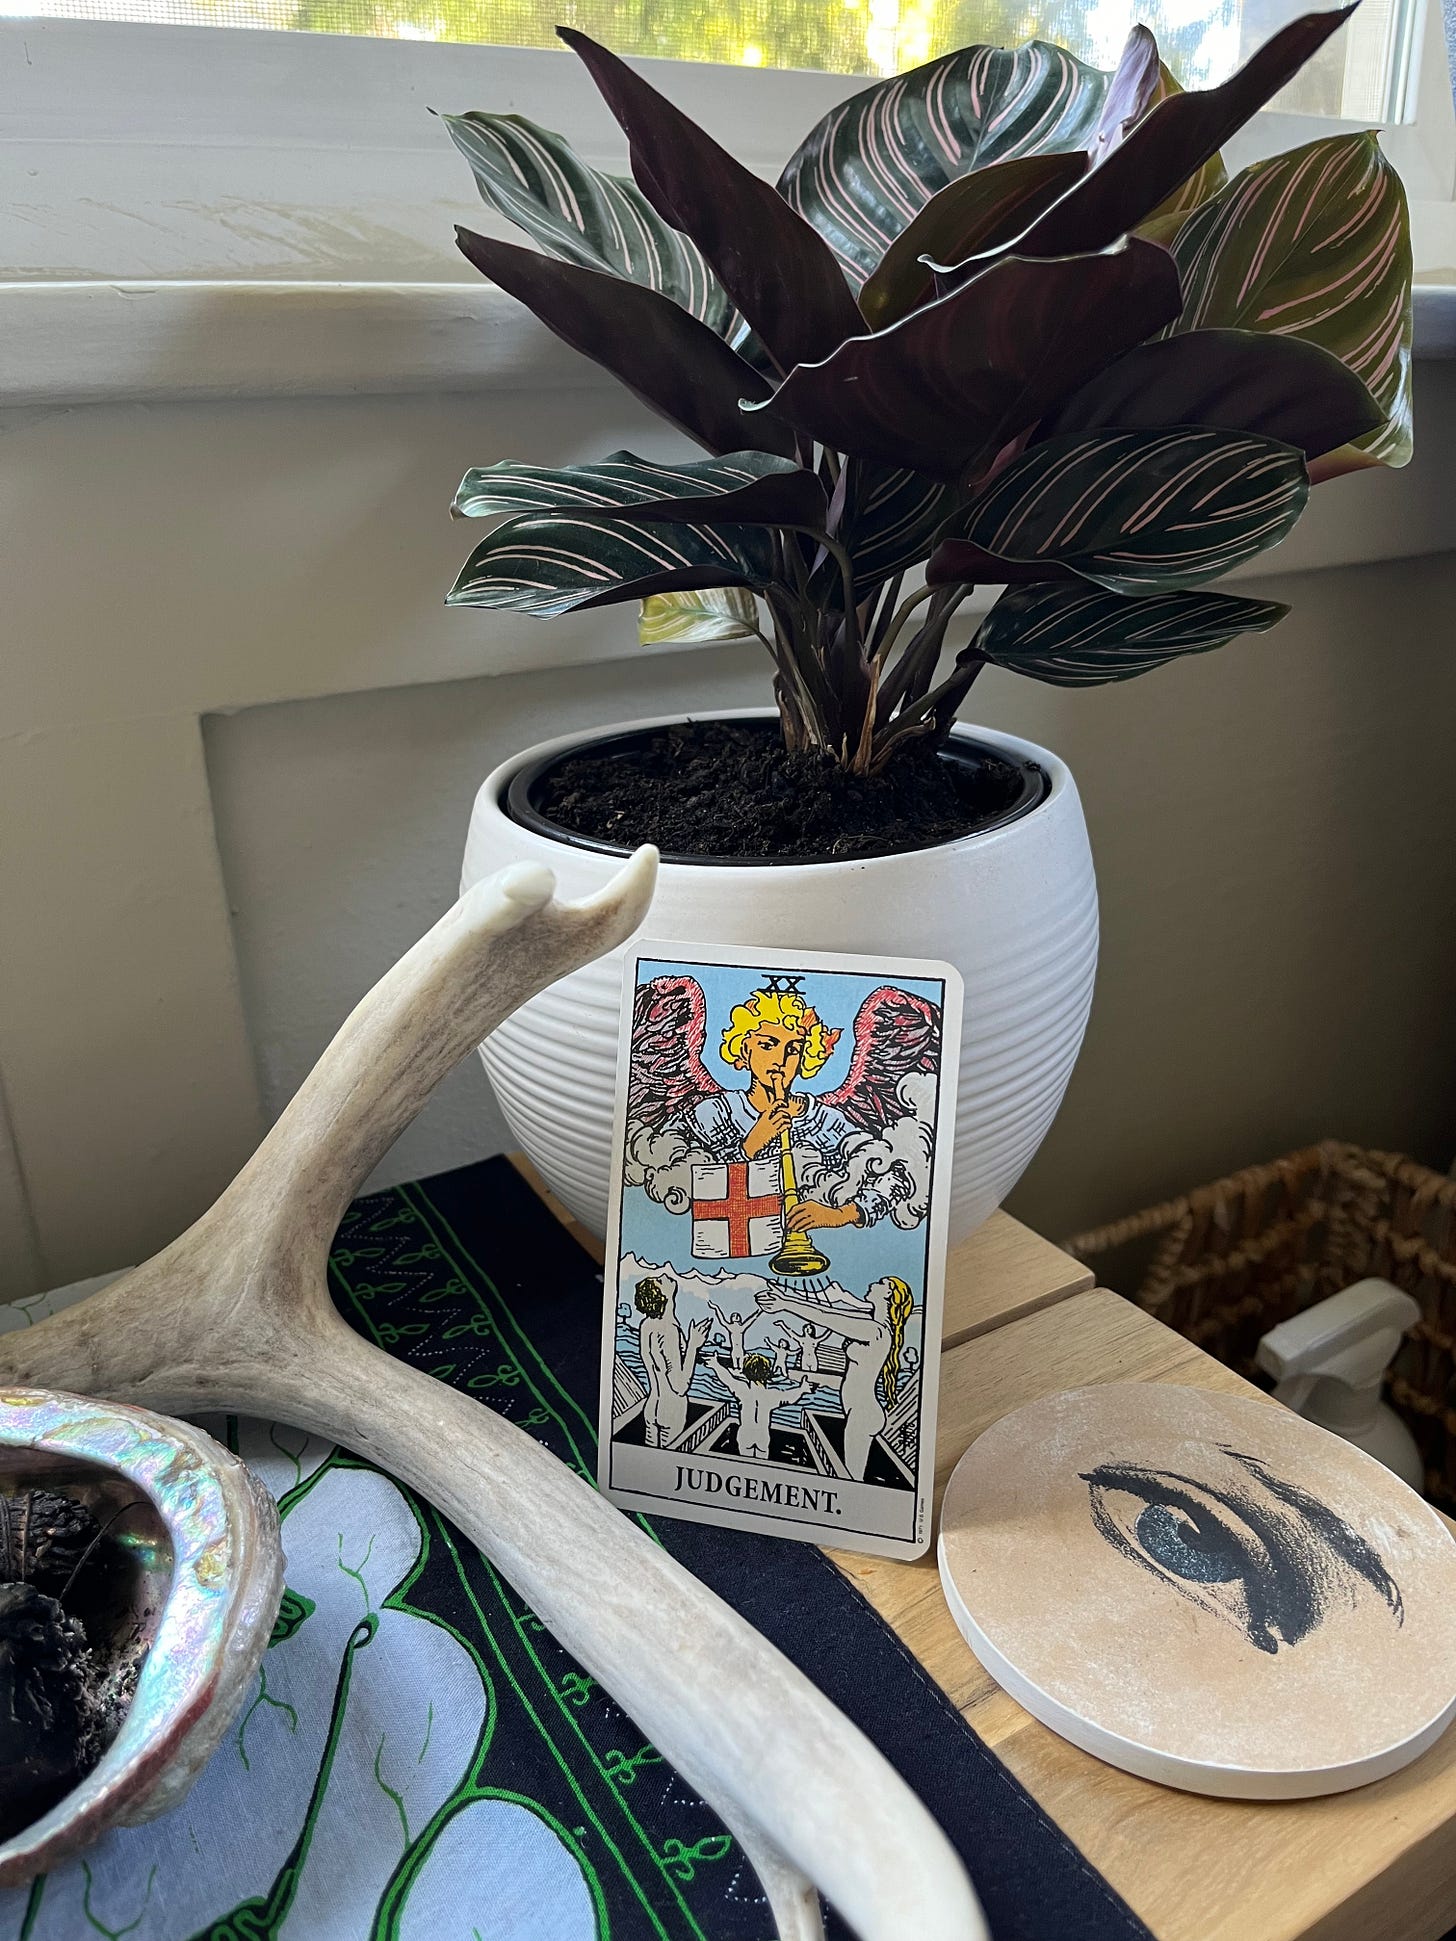 The Rider-Waite Judgement card leans against a white ceramic pot containing a pink-veined prayer plant sitting on an altar